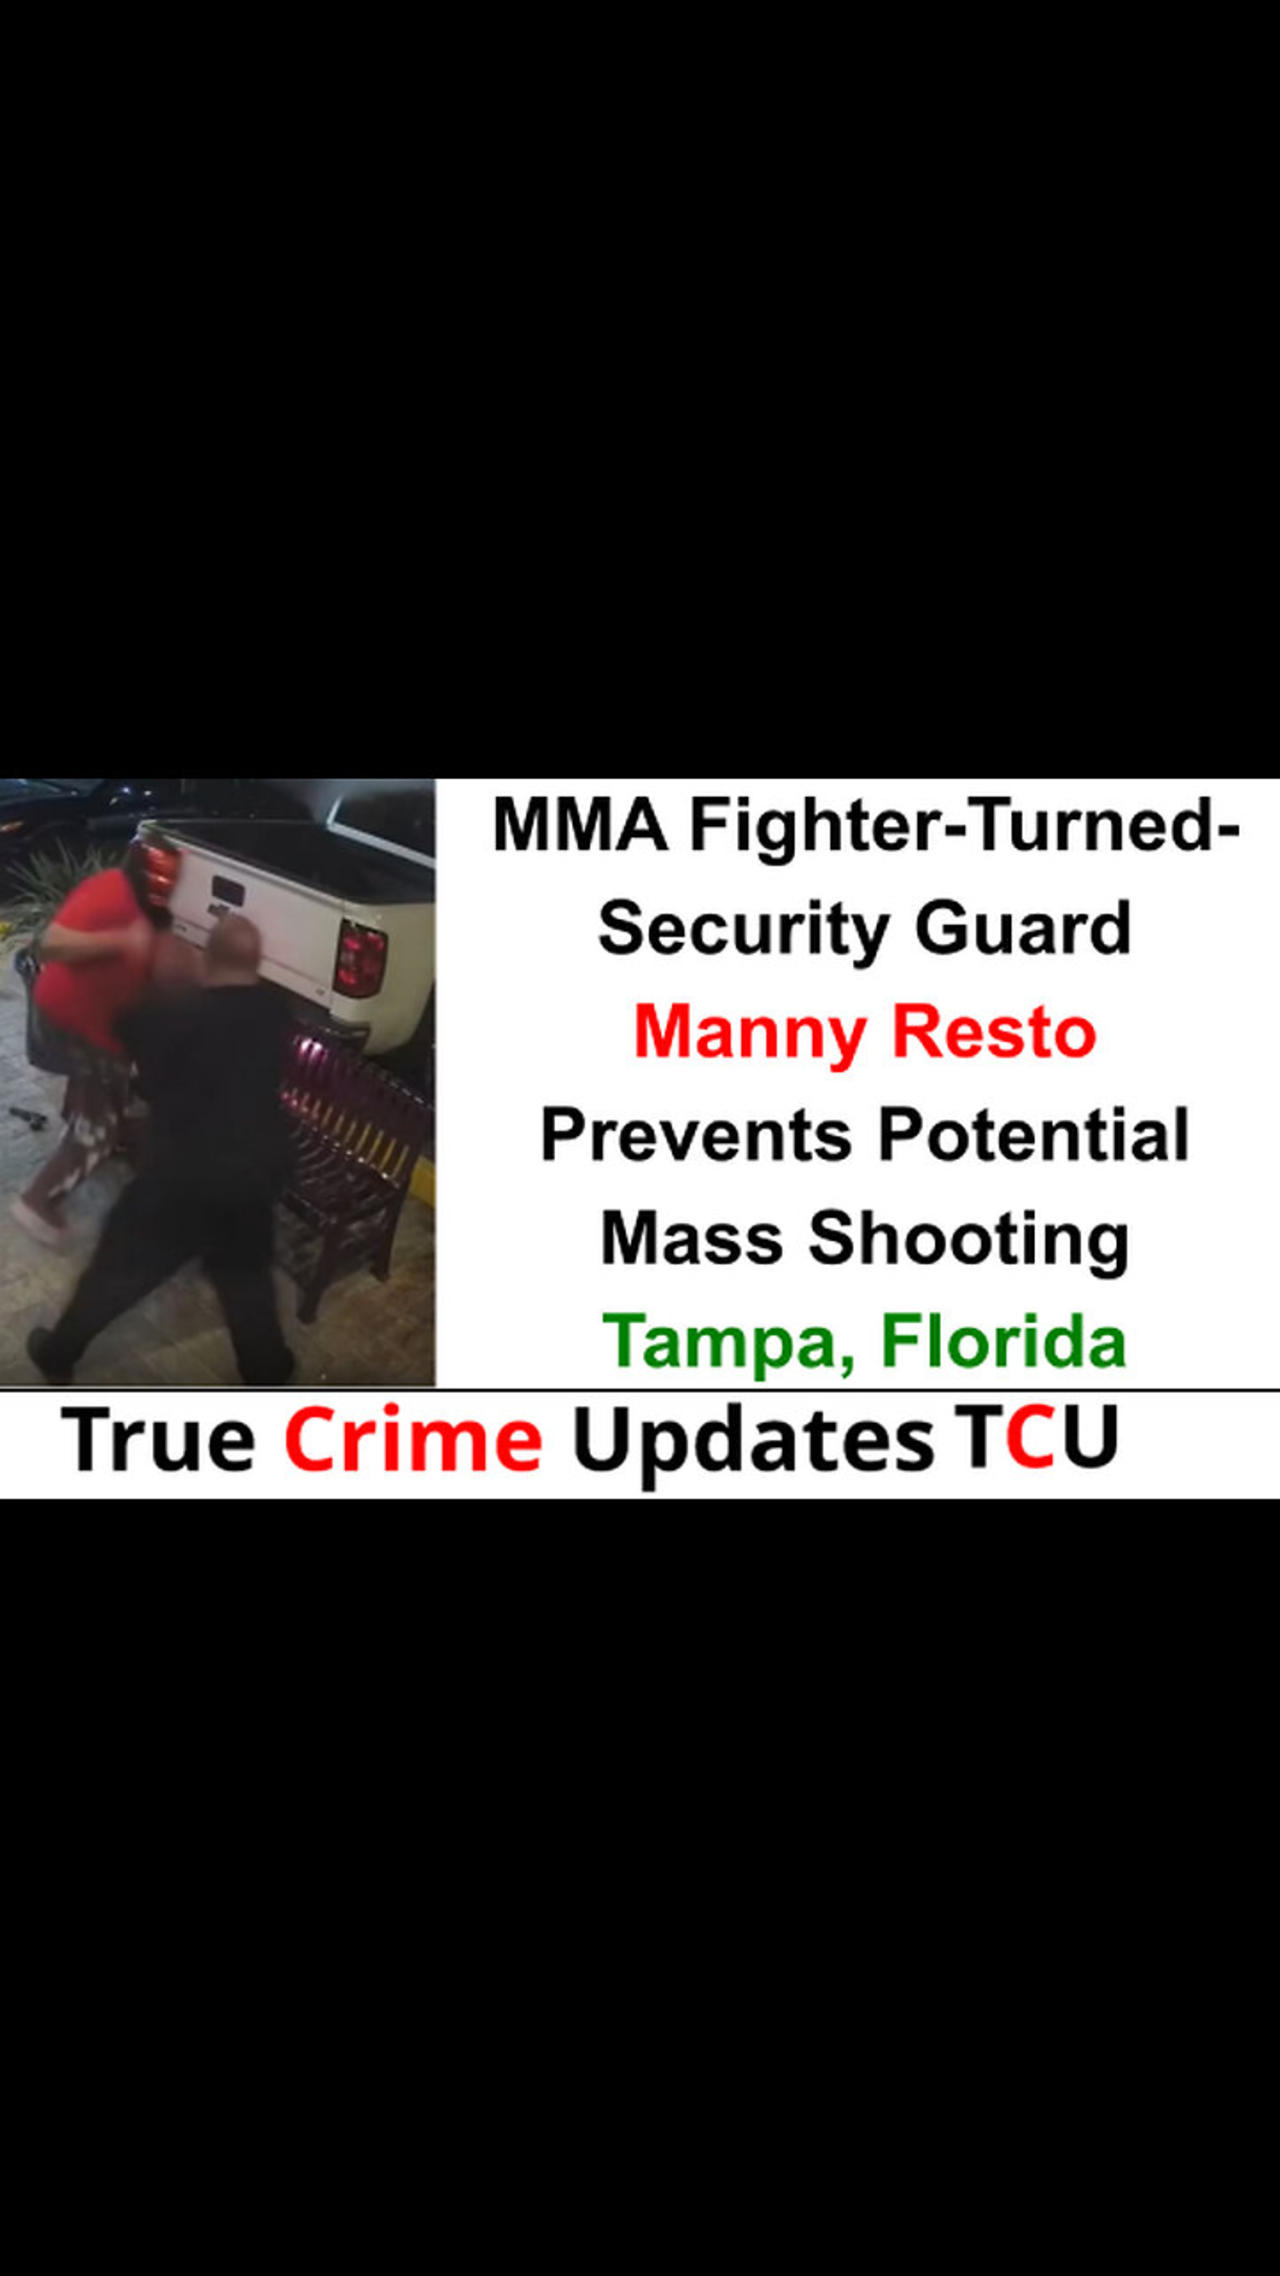 MMA Fighter-Turned-Security Guard Manny Resto Prevents Potential Mass Shooting - Tampa, Florida